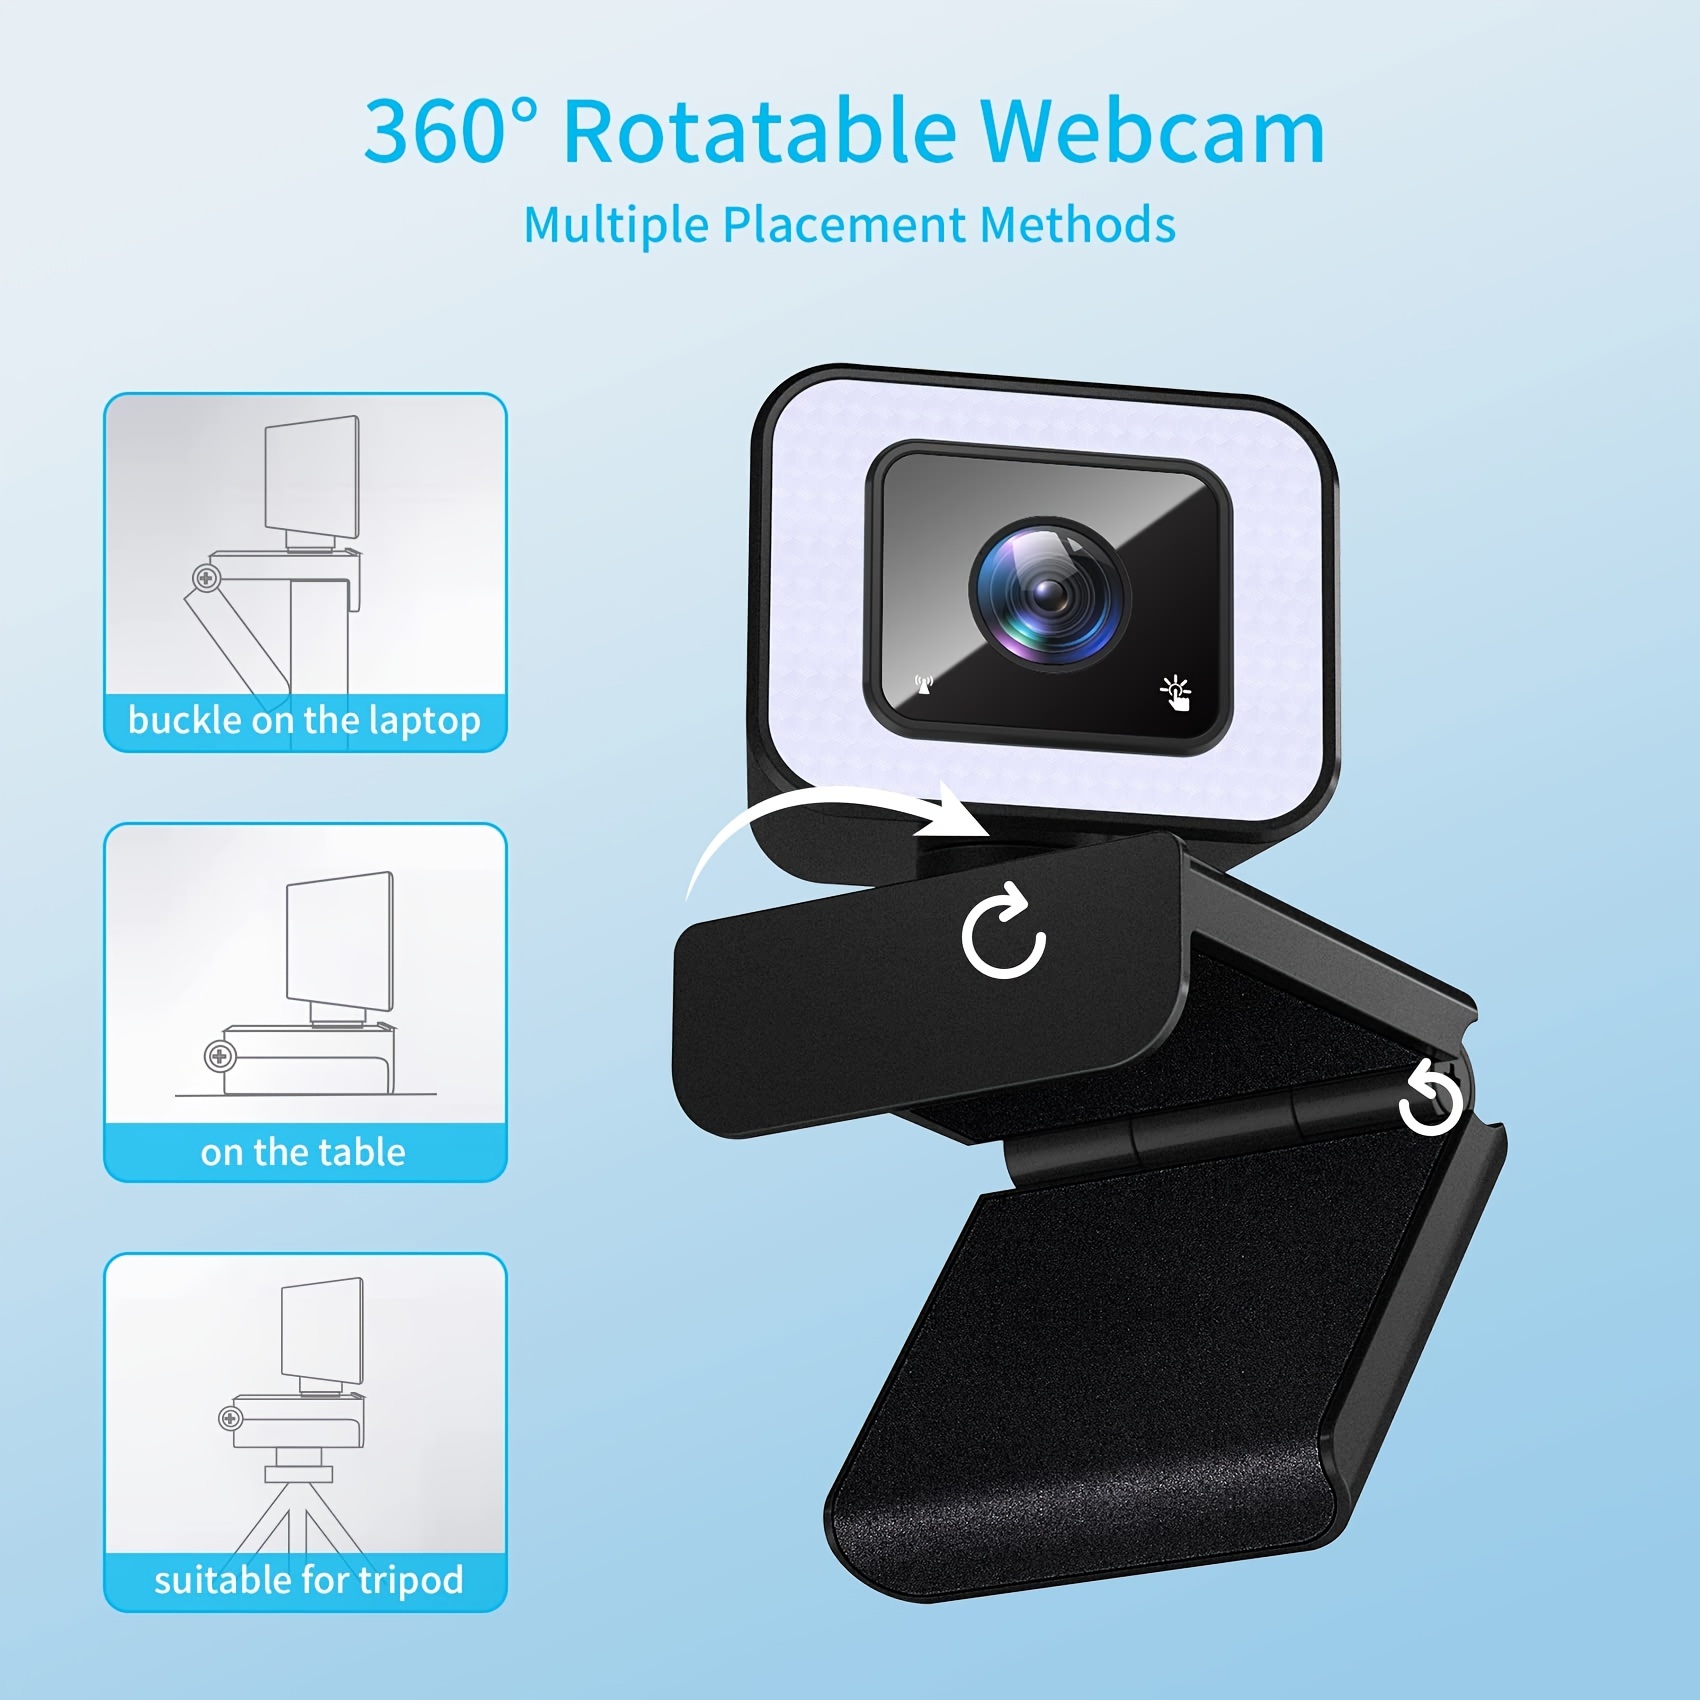 1080P HD Webcam with Microphone for Desktop, USB Computer Camera